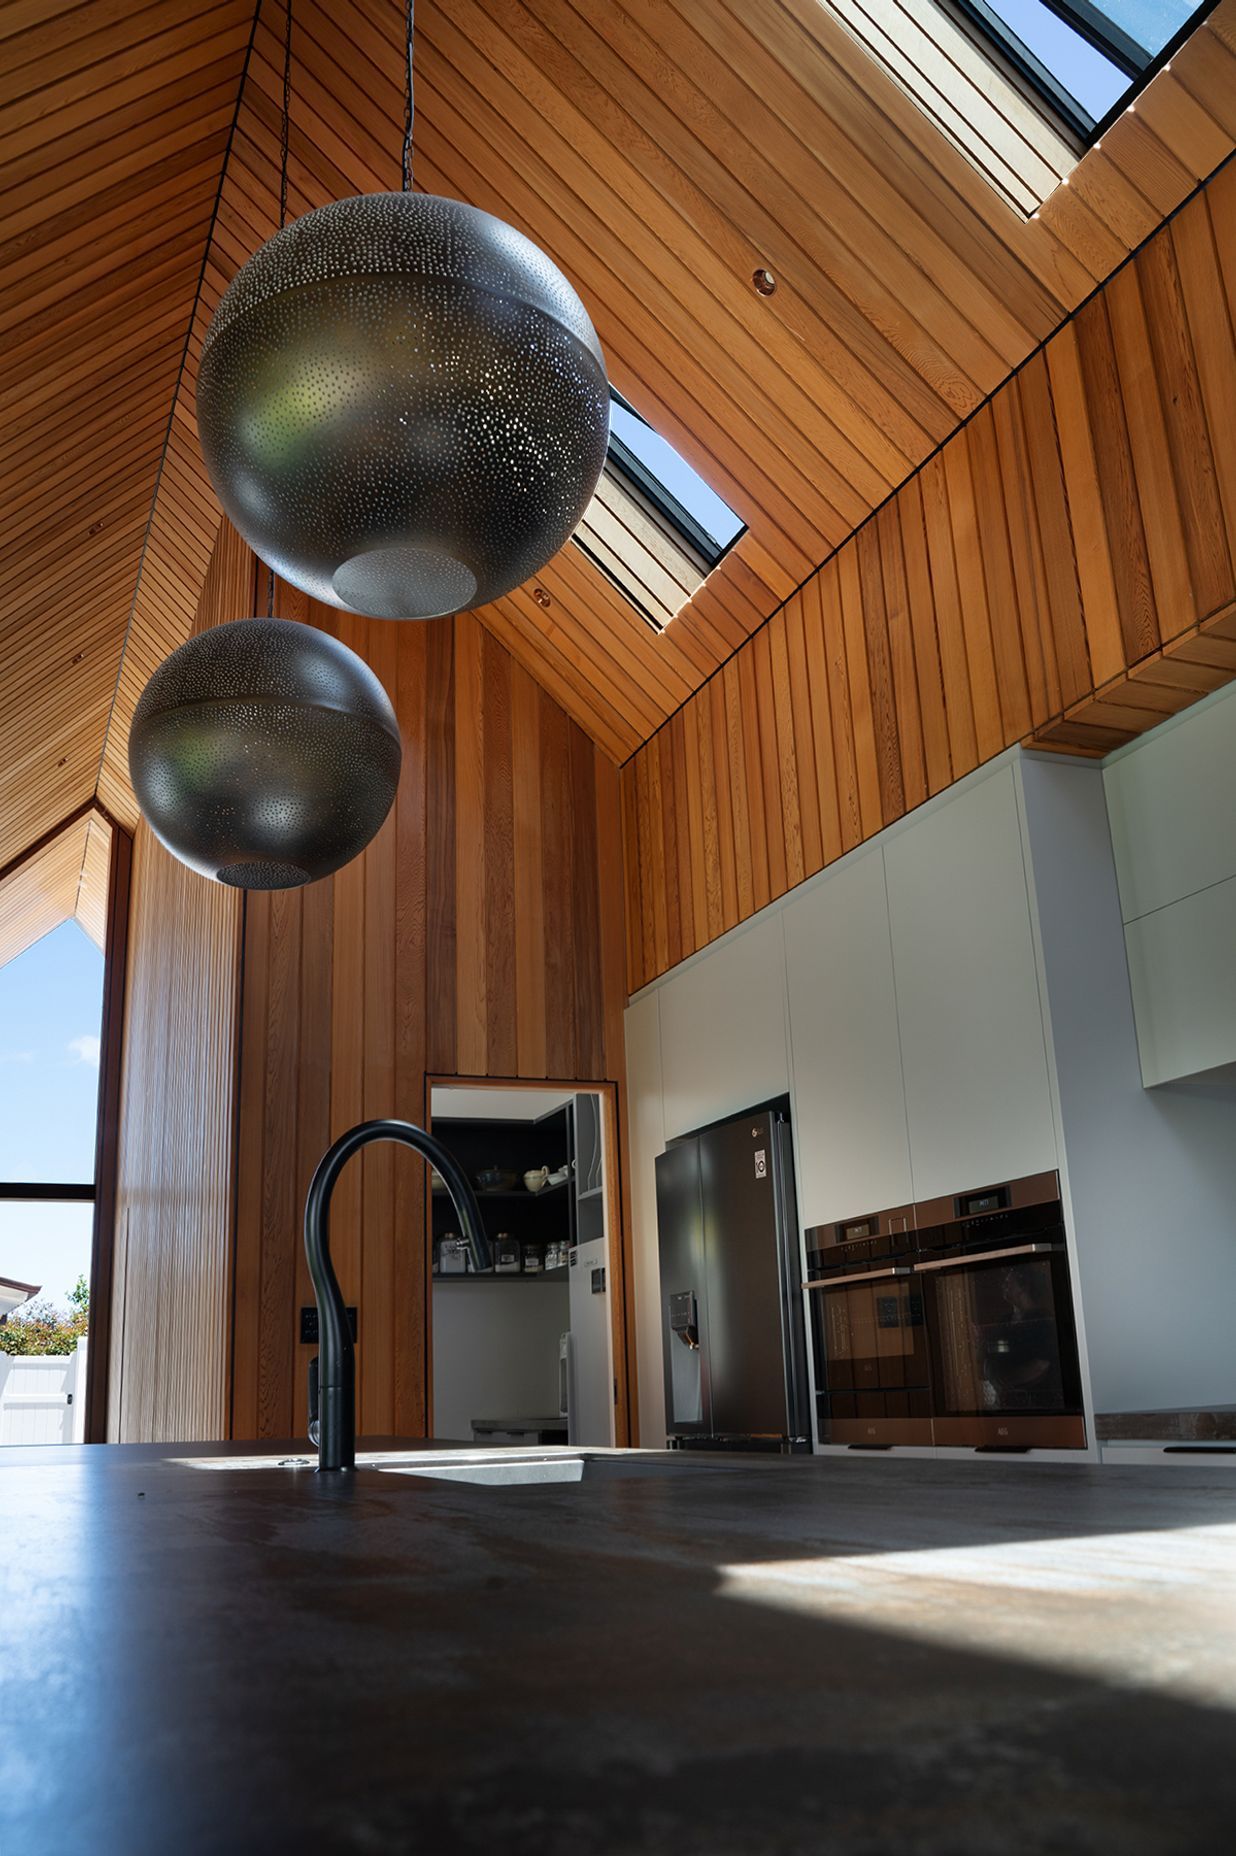 Western red cedar was used extensively throughout both the interior and exterior of the extension.